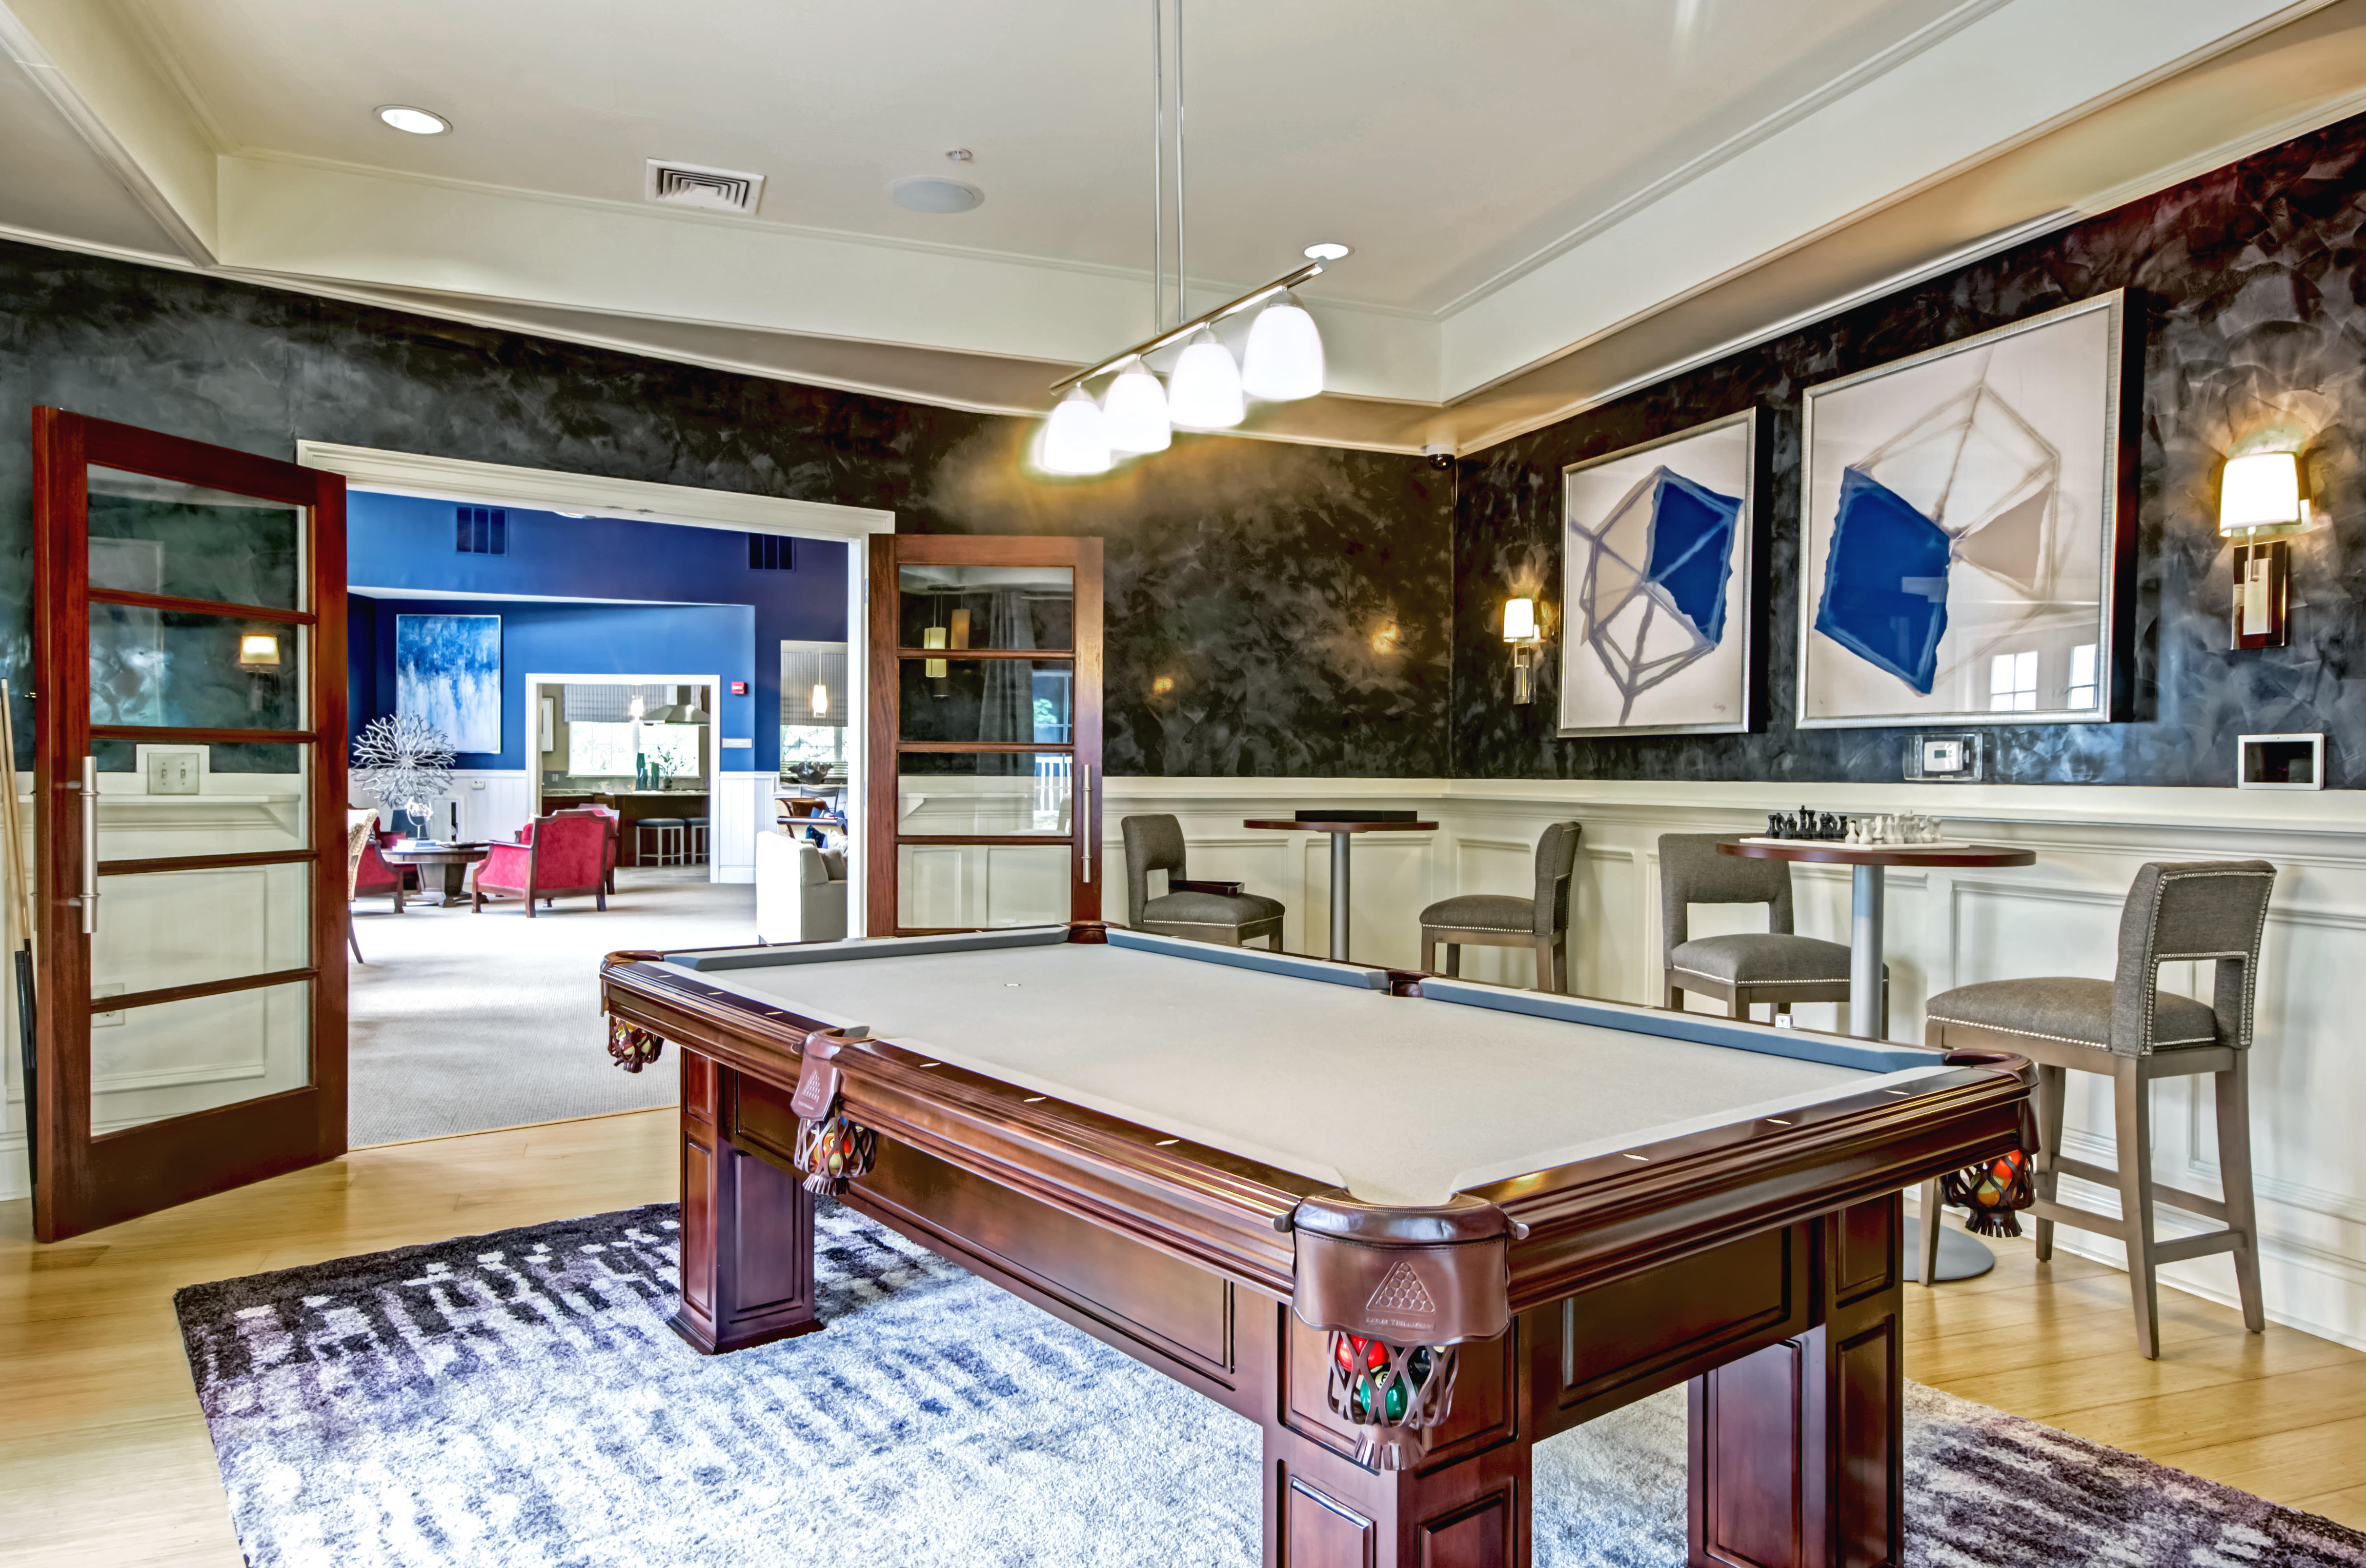 Enjoy a game of pool in our billiards game room